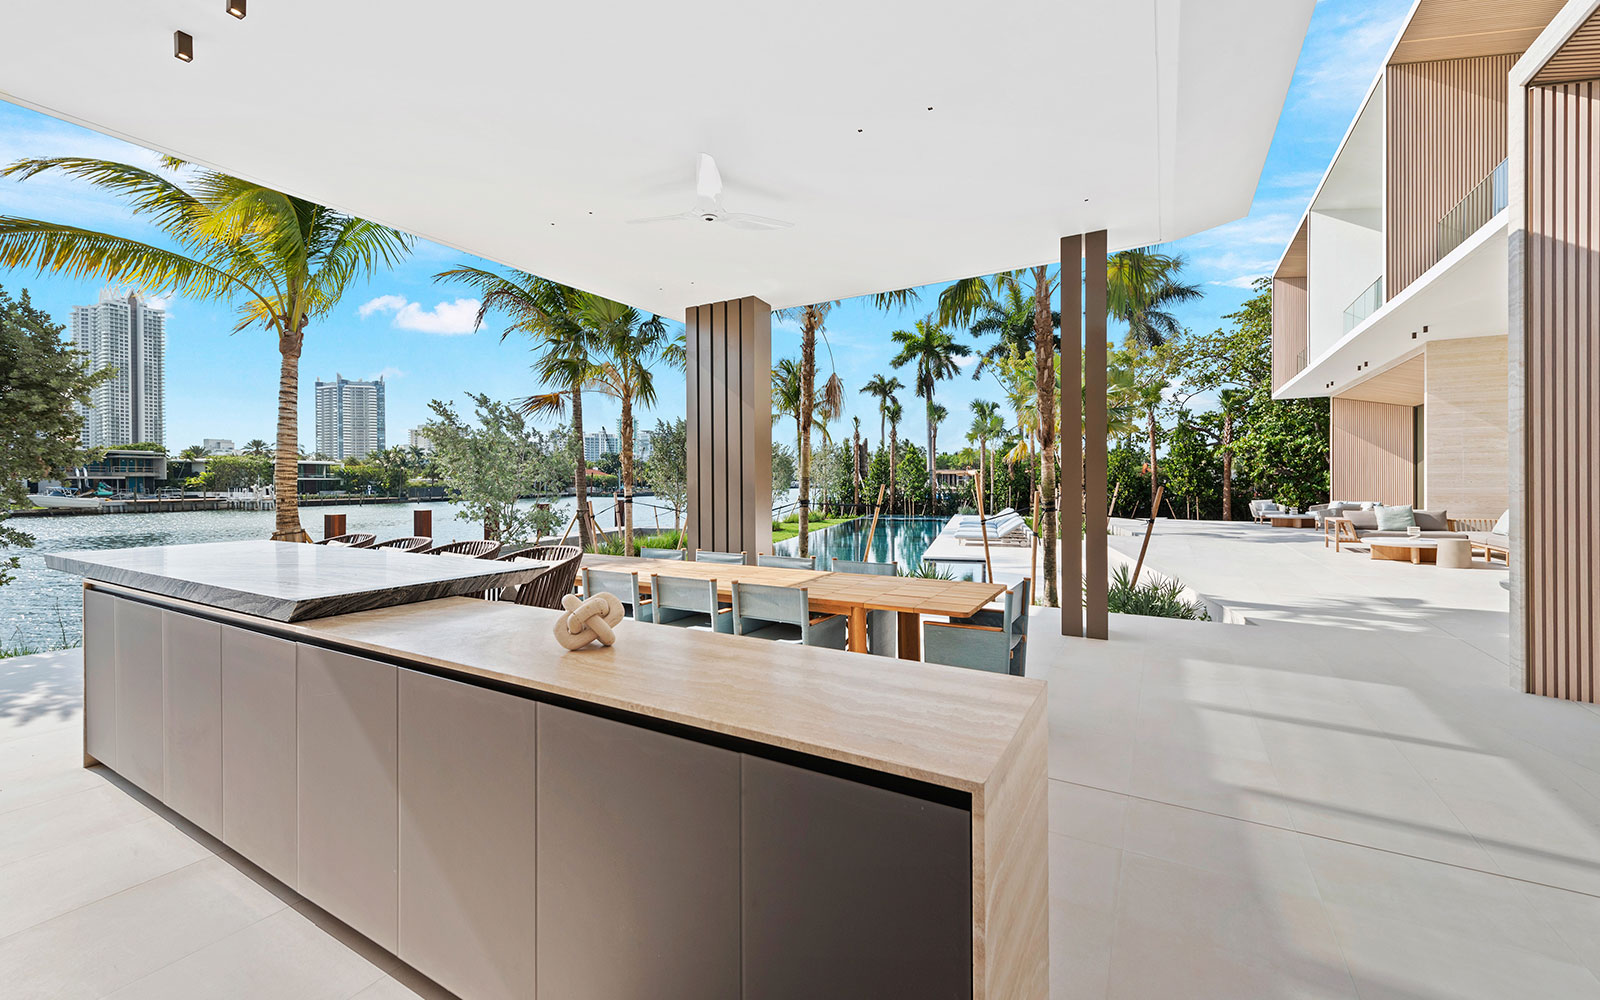 AquaBlue Sells One of Miami Beach’s Priciest Mansions for $63M